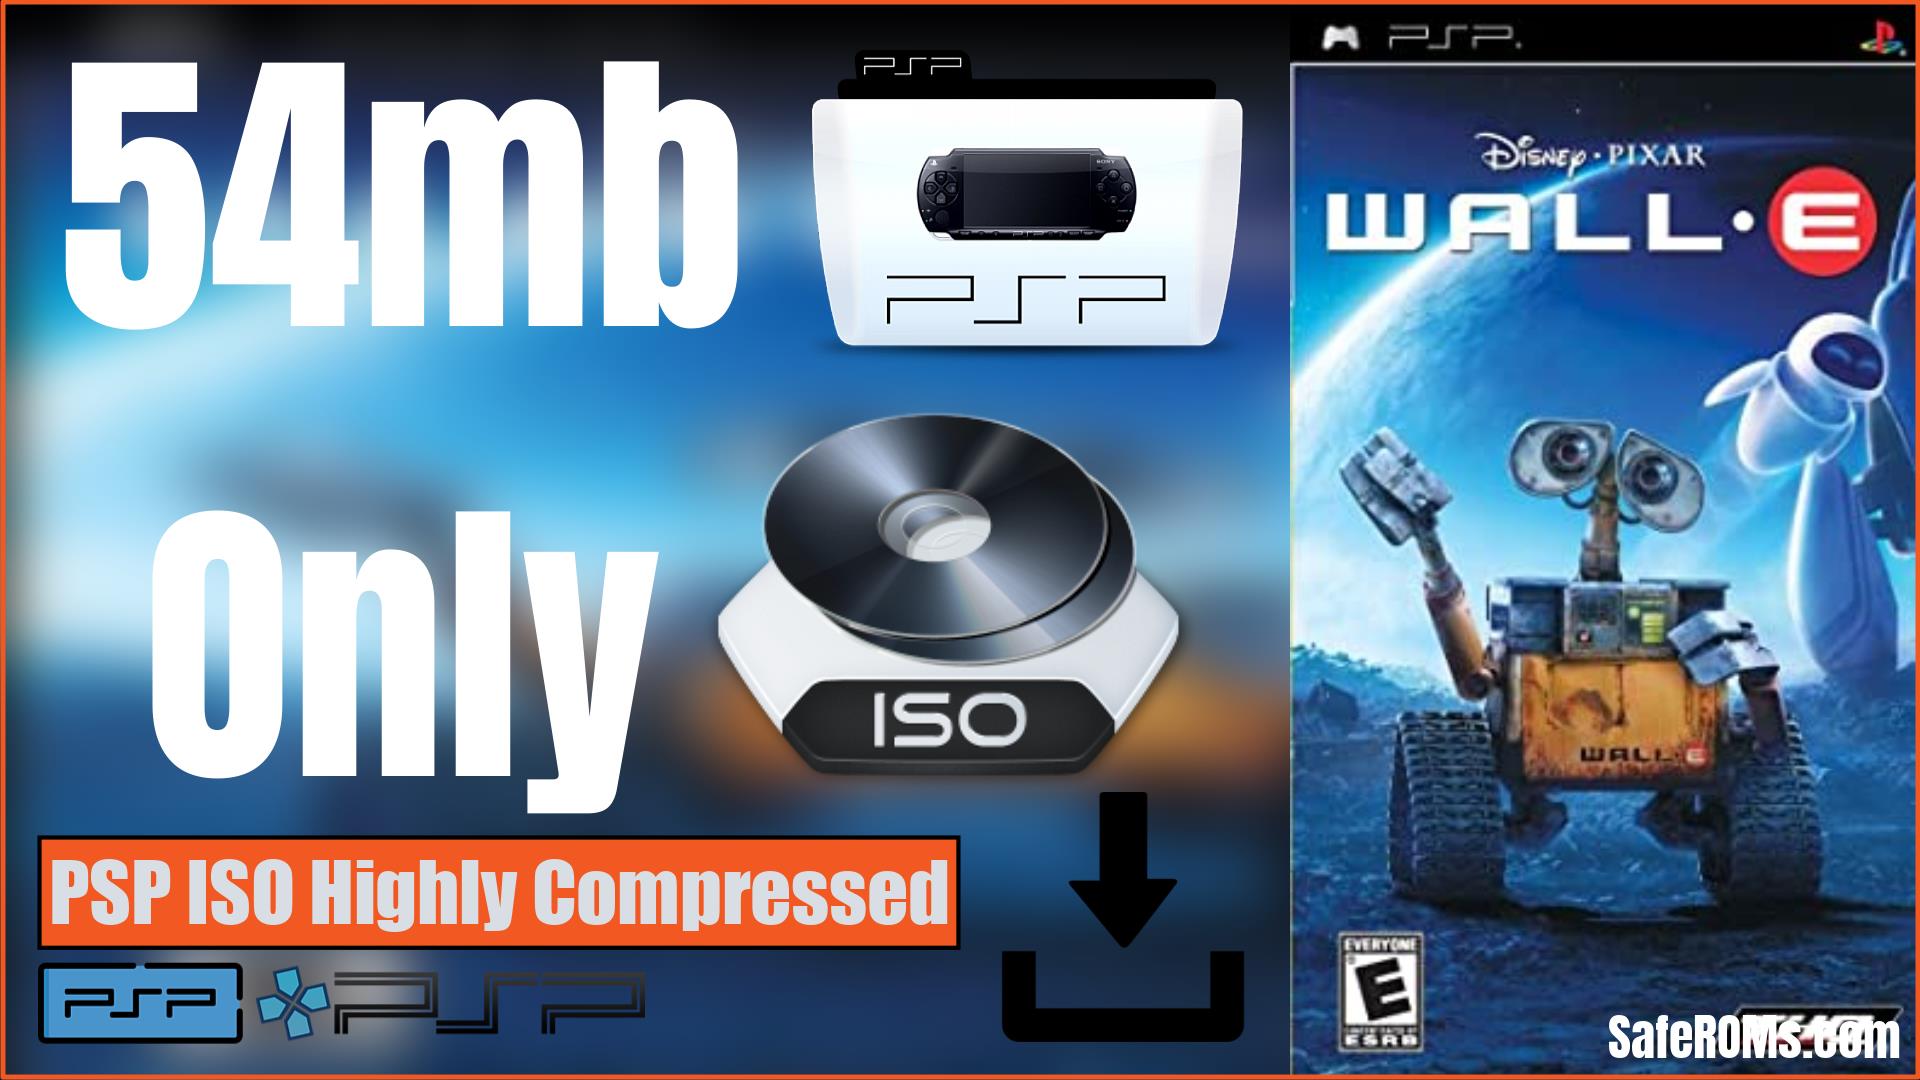 WALL-E PSP ISO Highly Compresssed Download